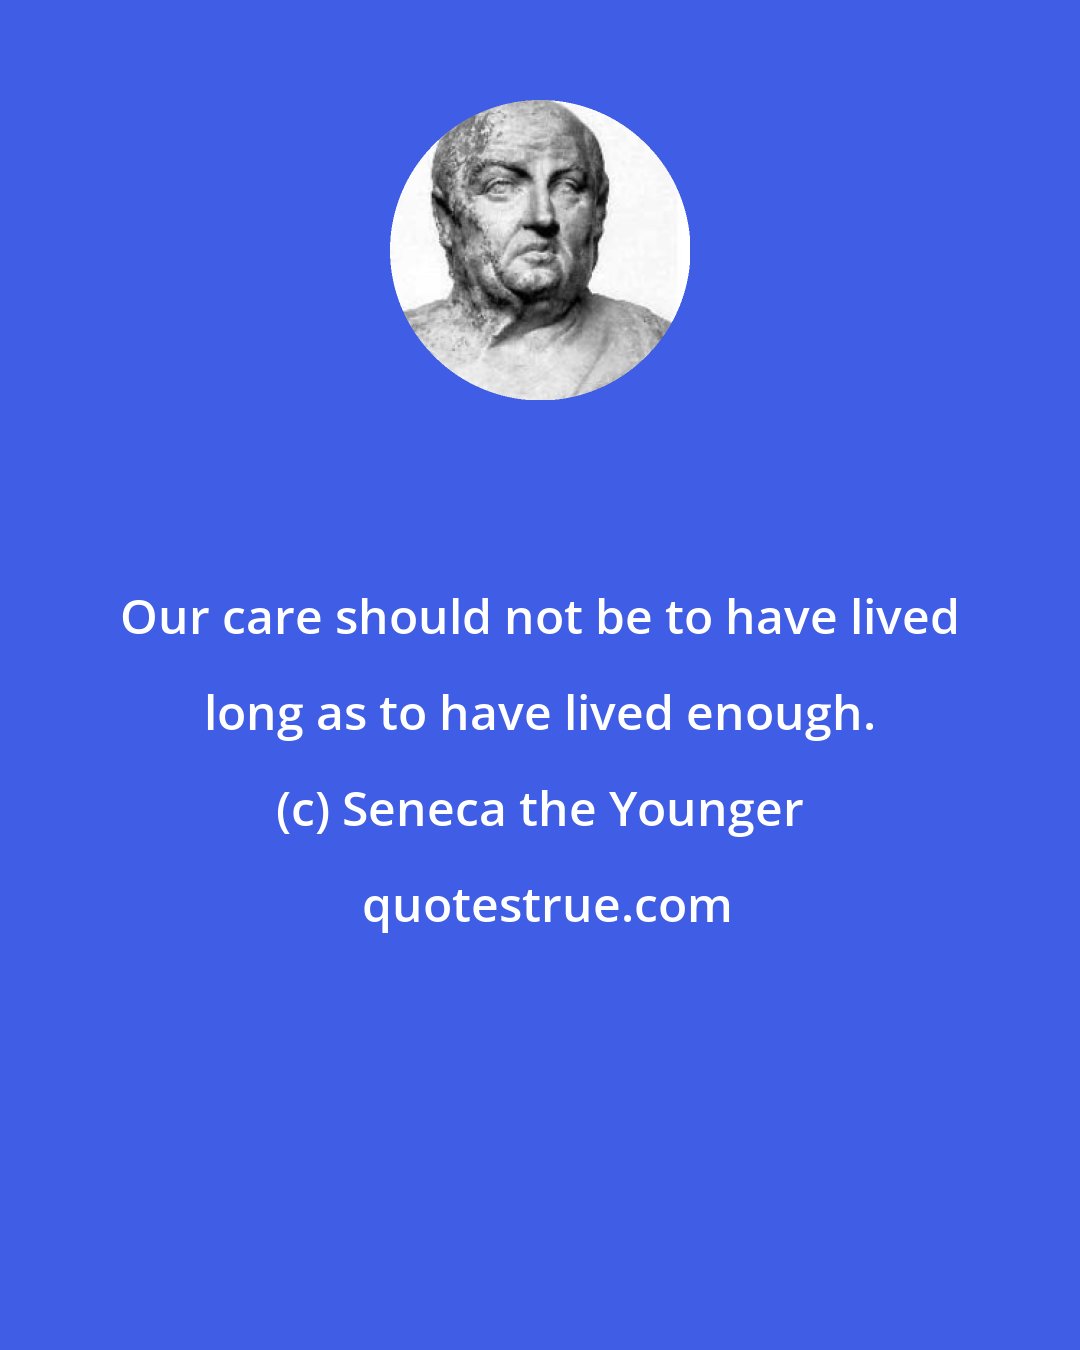 Seneca the Younger: Our care should not be to have lived long as to have lived enough.